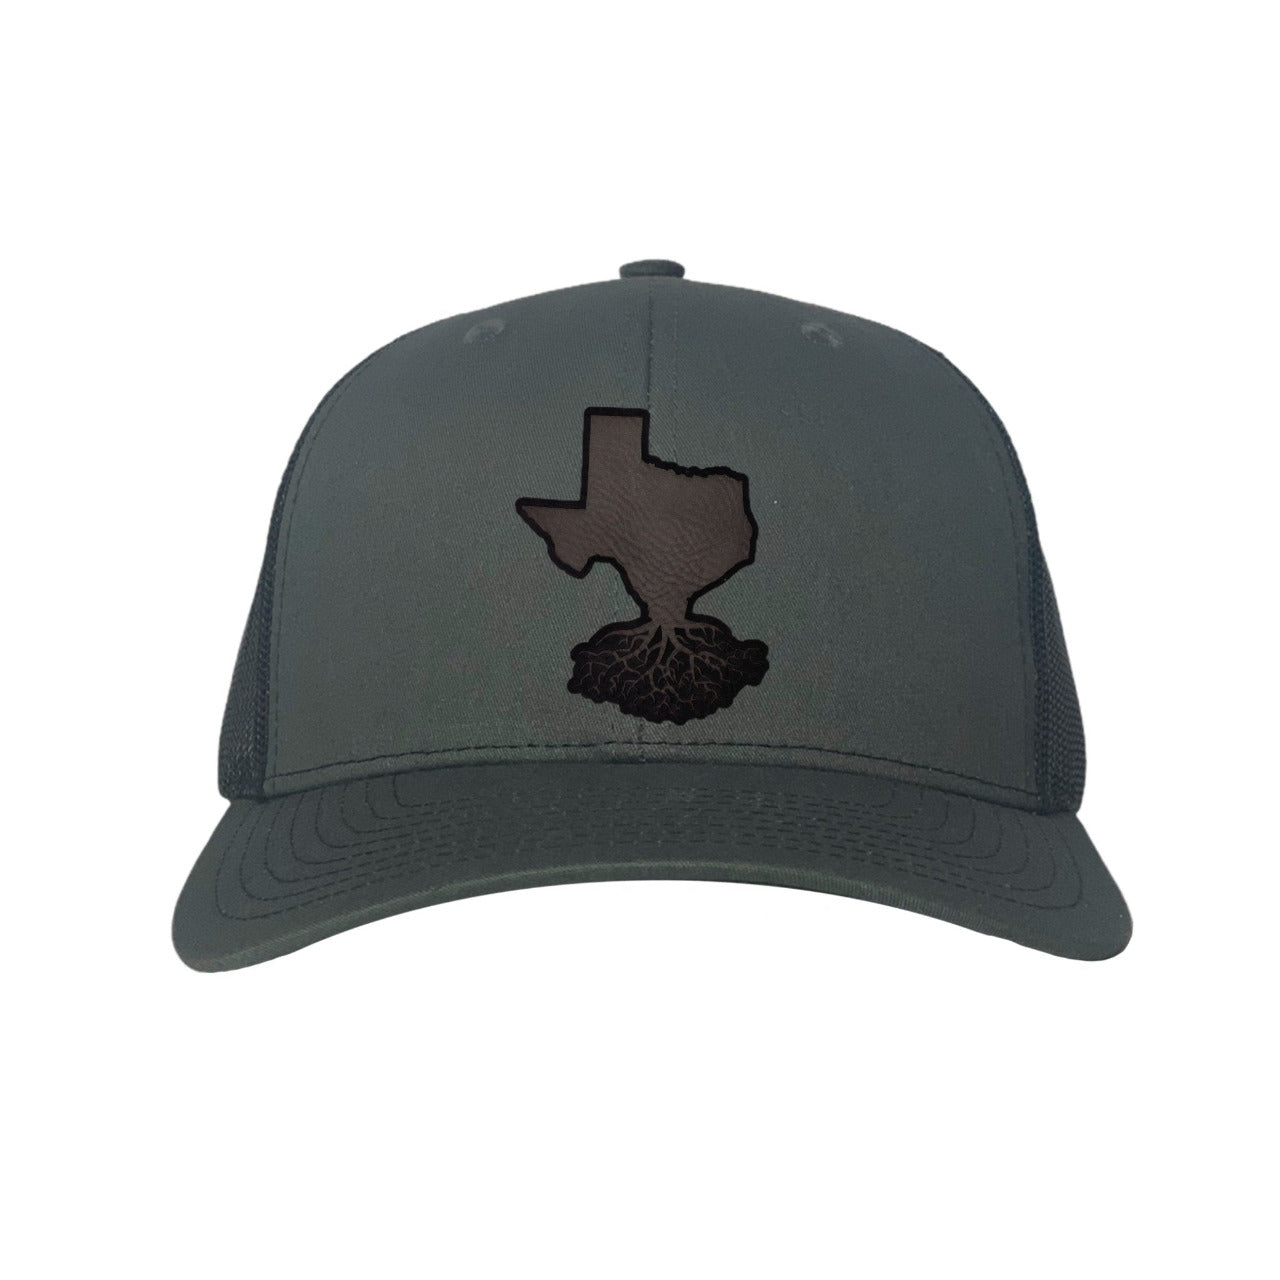 Texas Roots Patch Trucker Hat - Hats